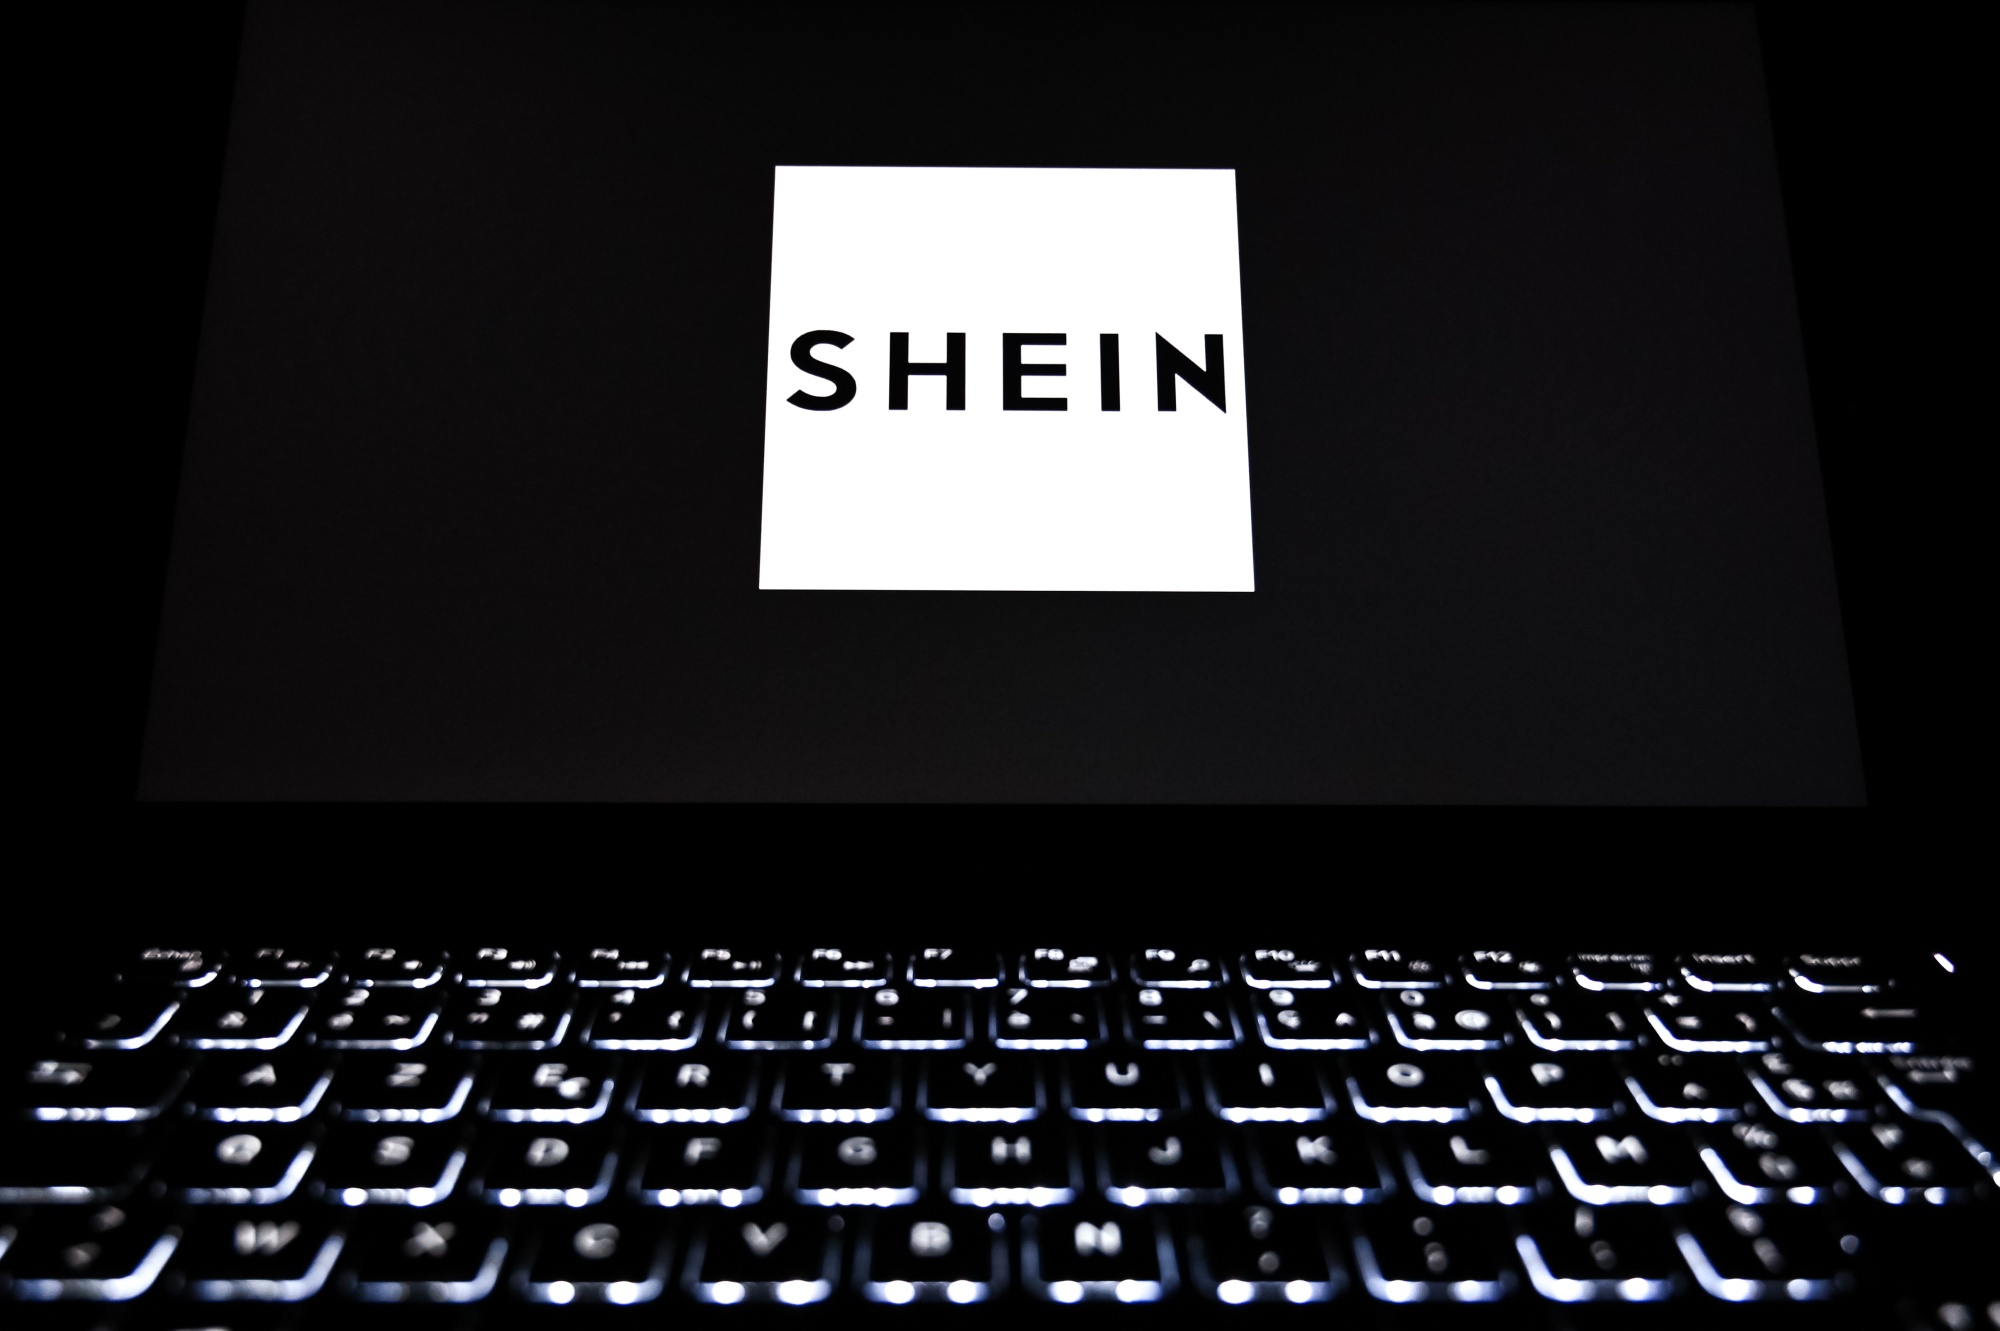 Shein Is Biggest User of Polyester Among Fast Fashion Brands - Bloomberg